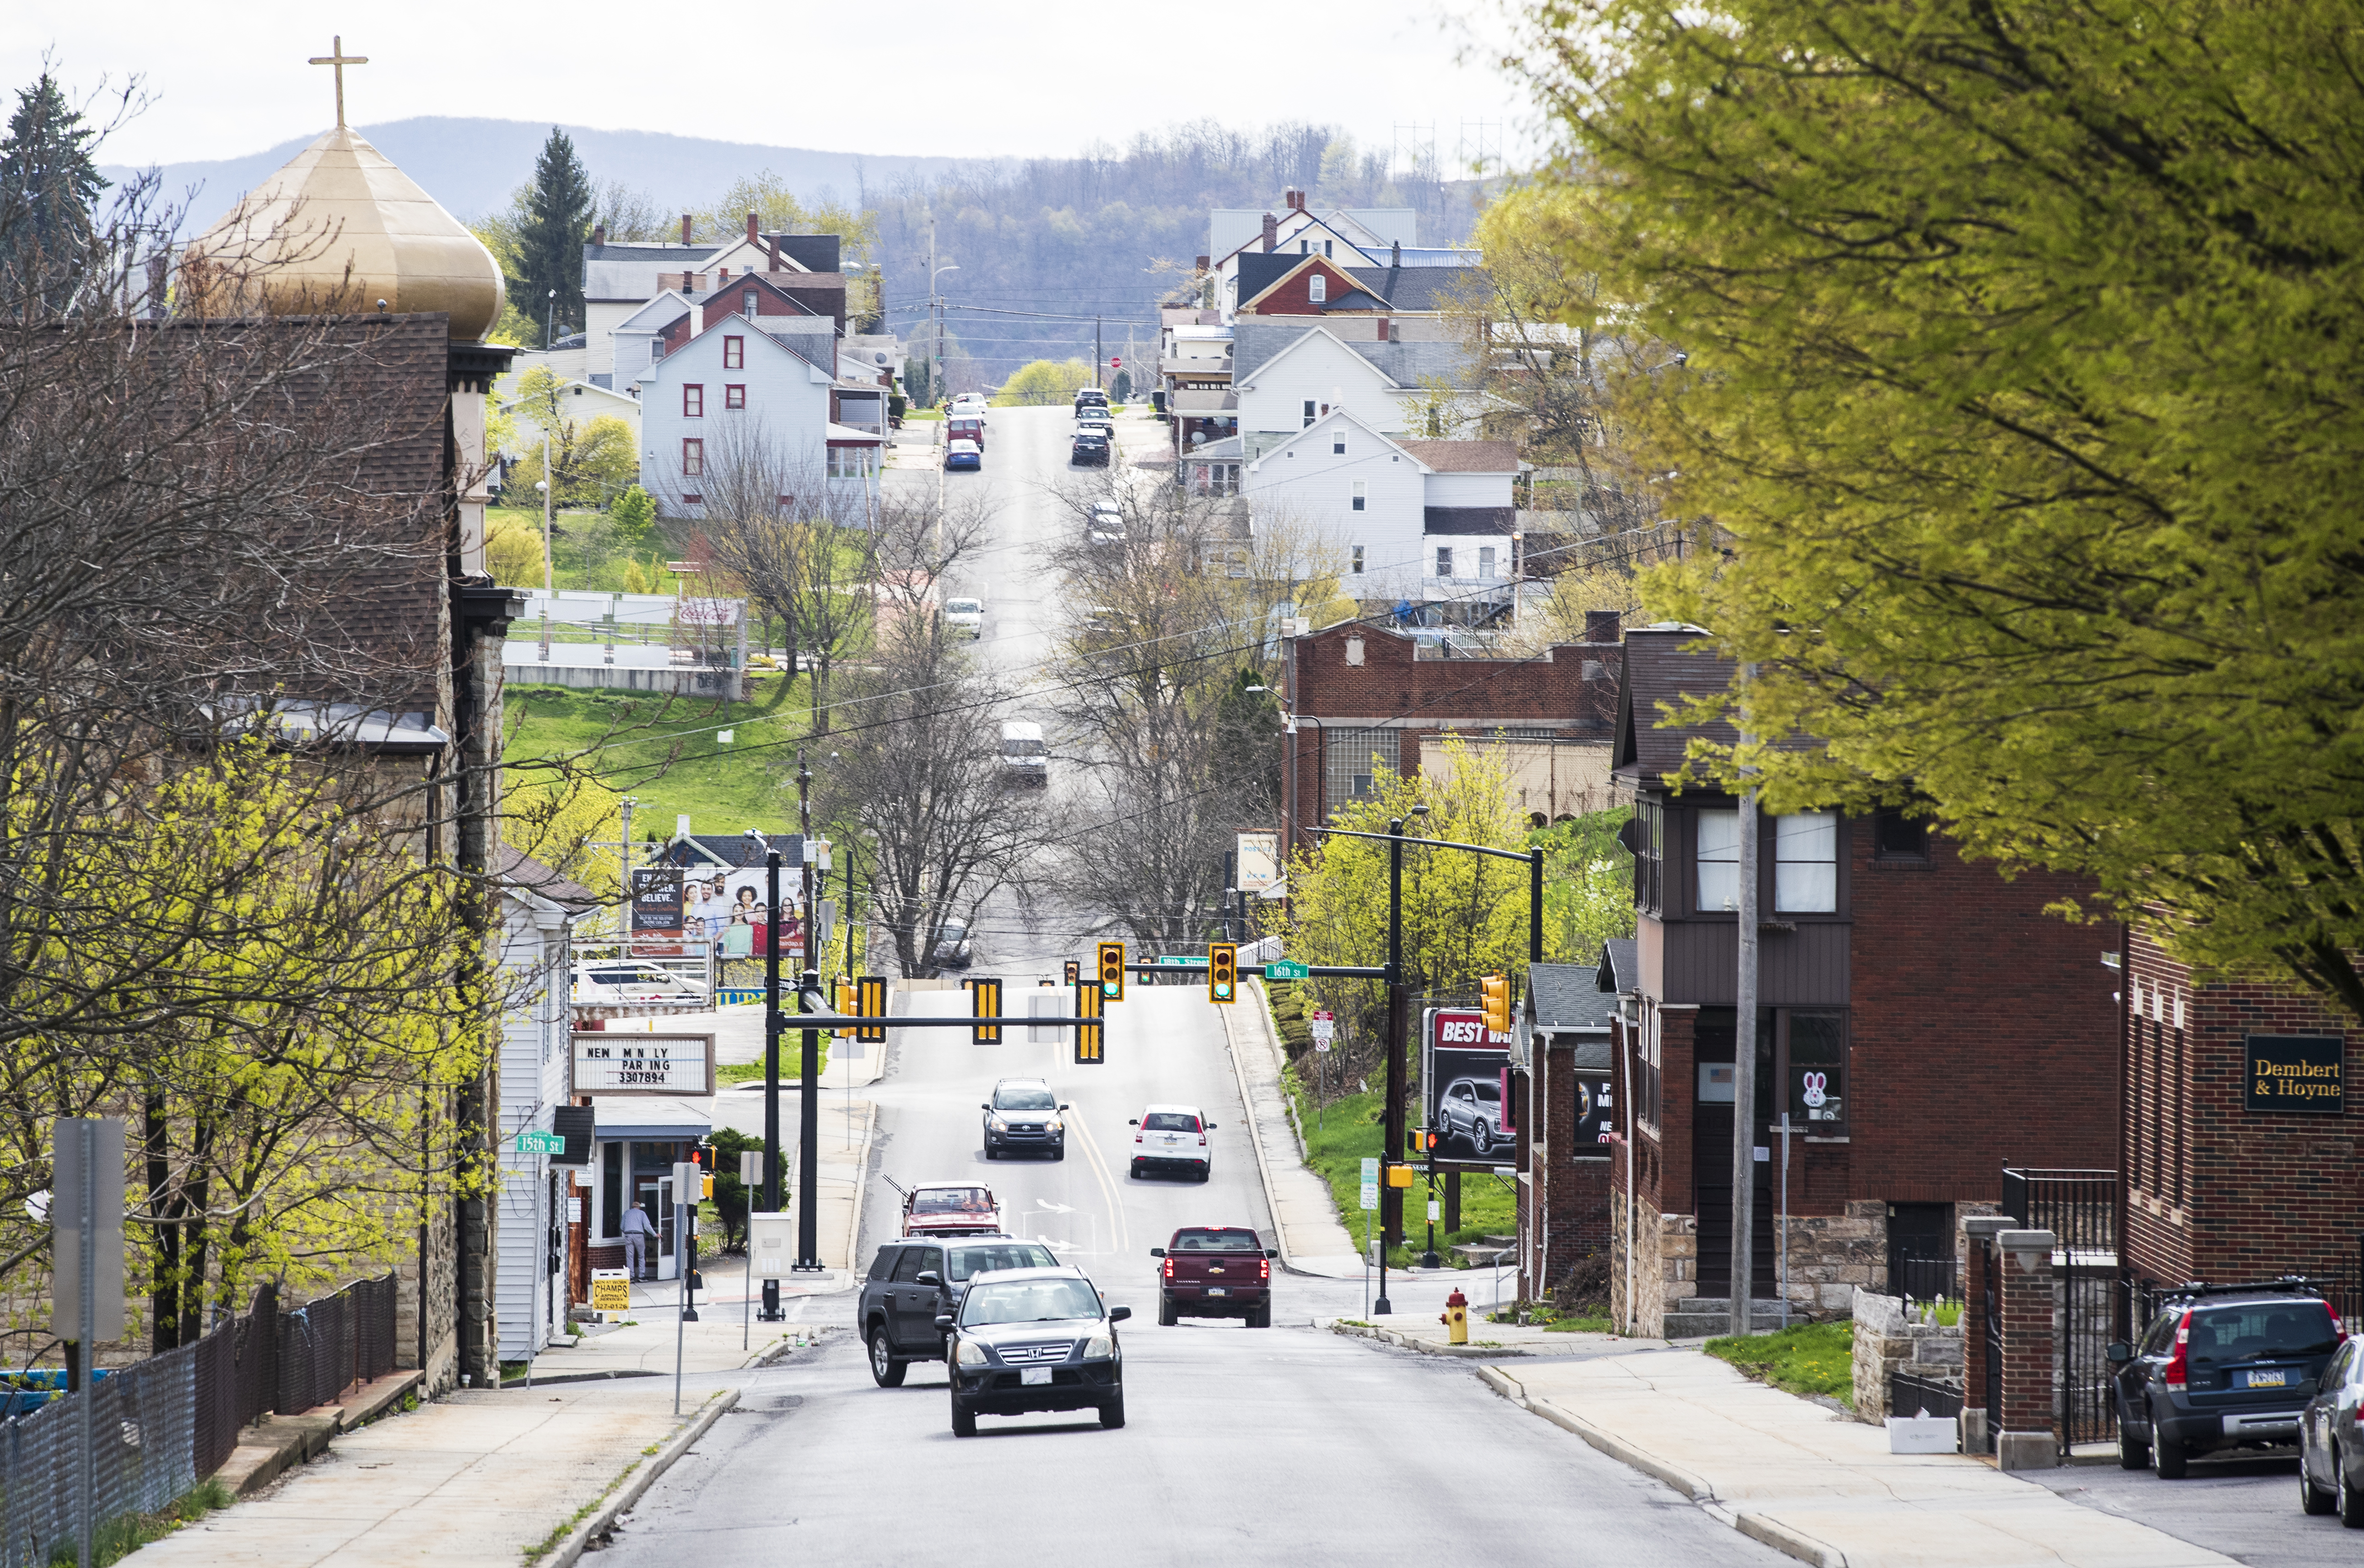 Scenes from Altoona, Pa. April 14, 2021 Sean Simmers |ssimmers@pennlive.com